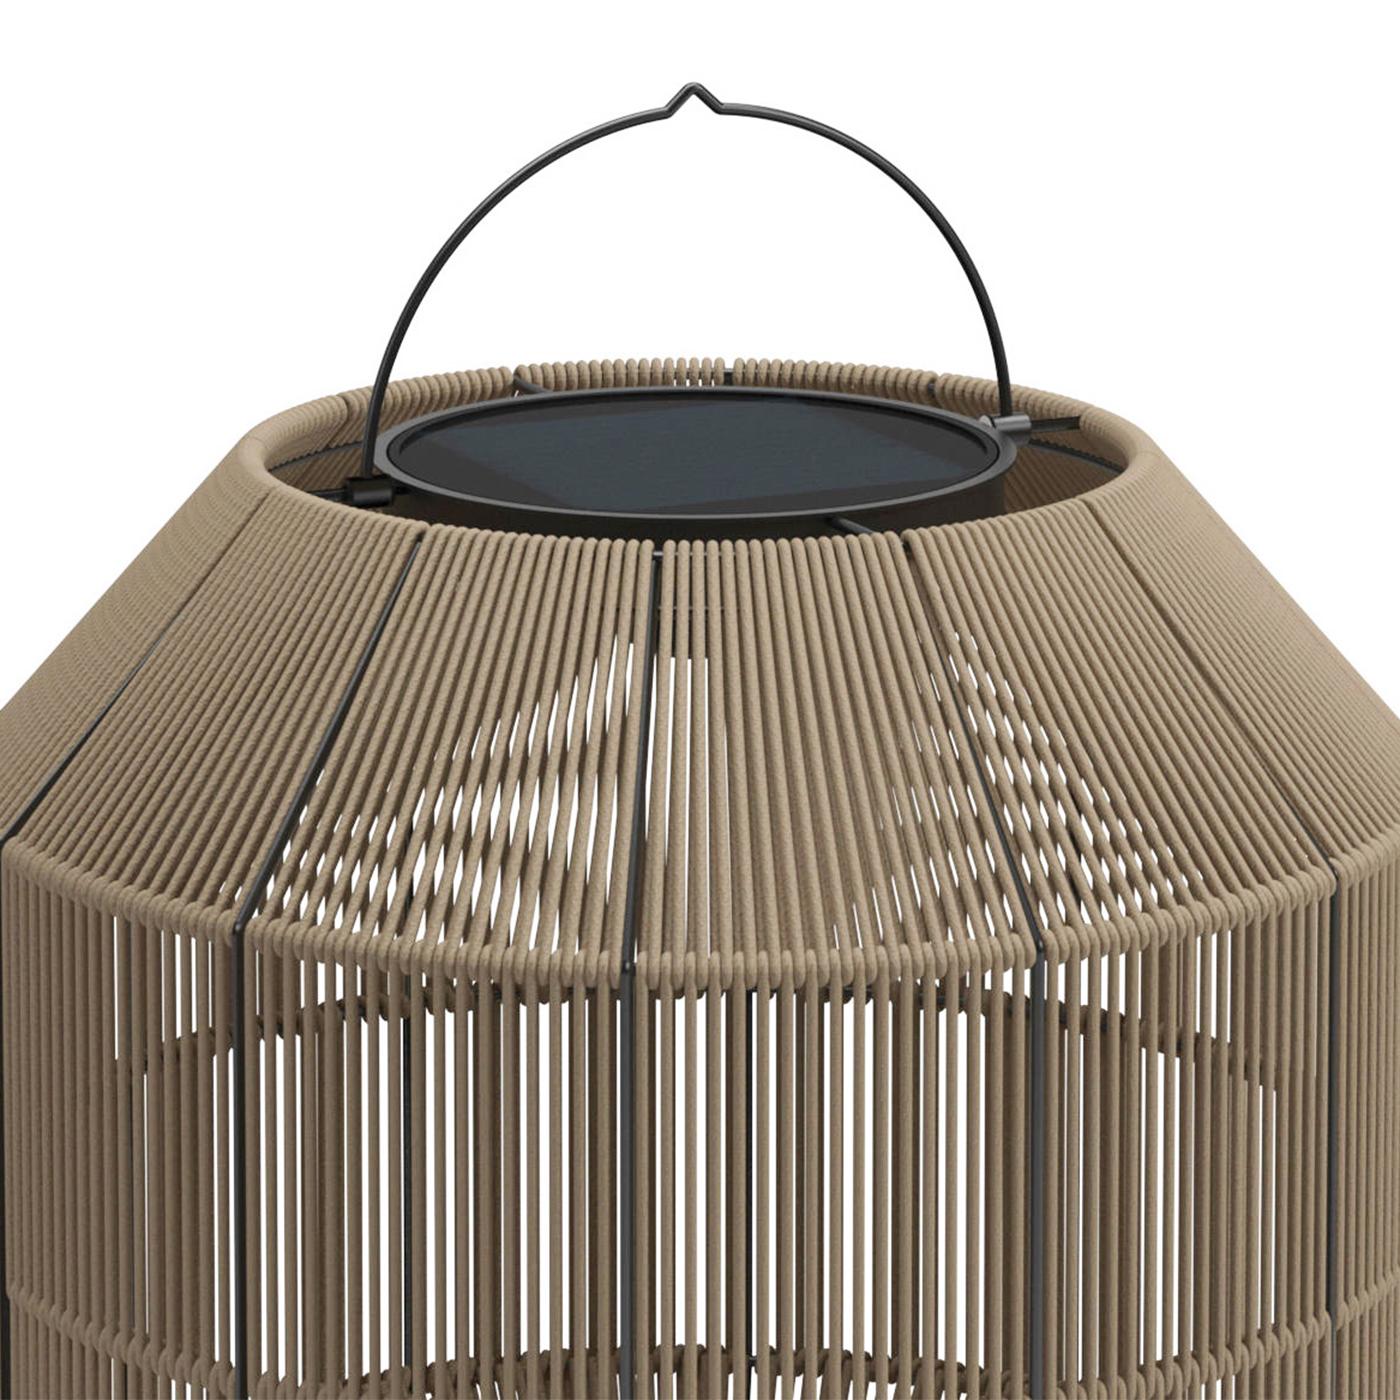 Floor lamp bird cage outdoor in all weather woven wicker over powder coated in natural 
finish with stainless steel frame. With mains power and solar rechargable LED light unit.
With remote control radio frequency with 8 light output settings.